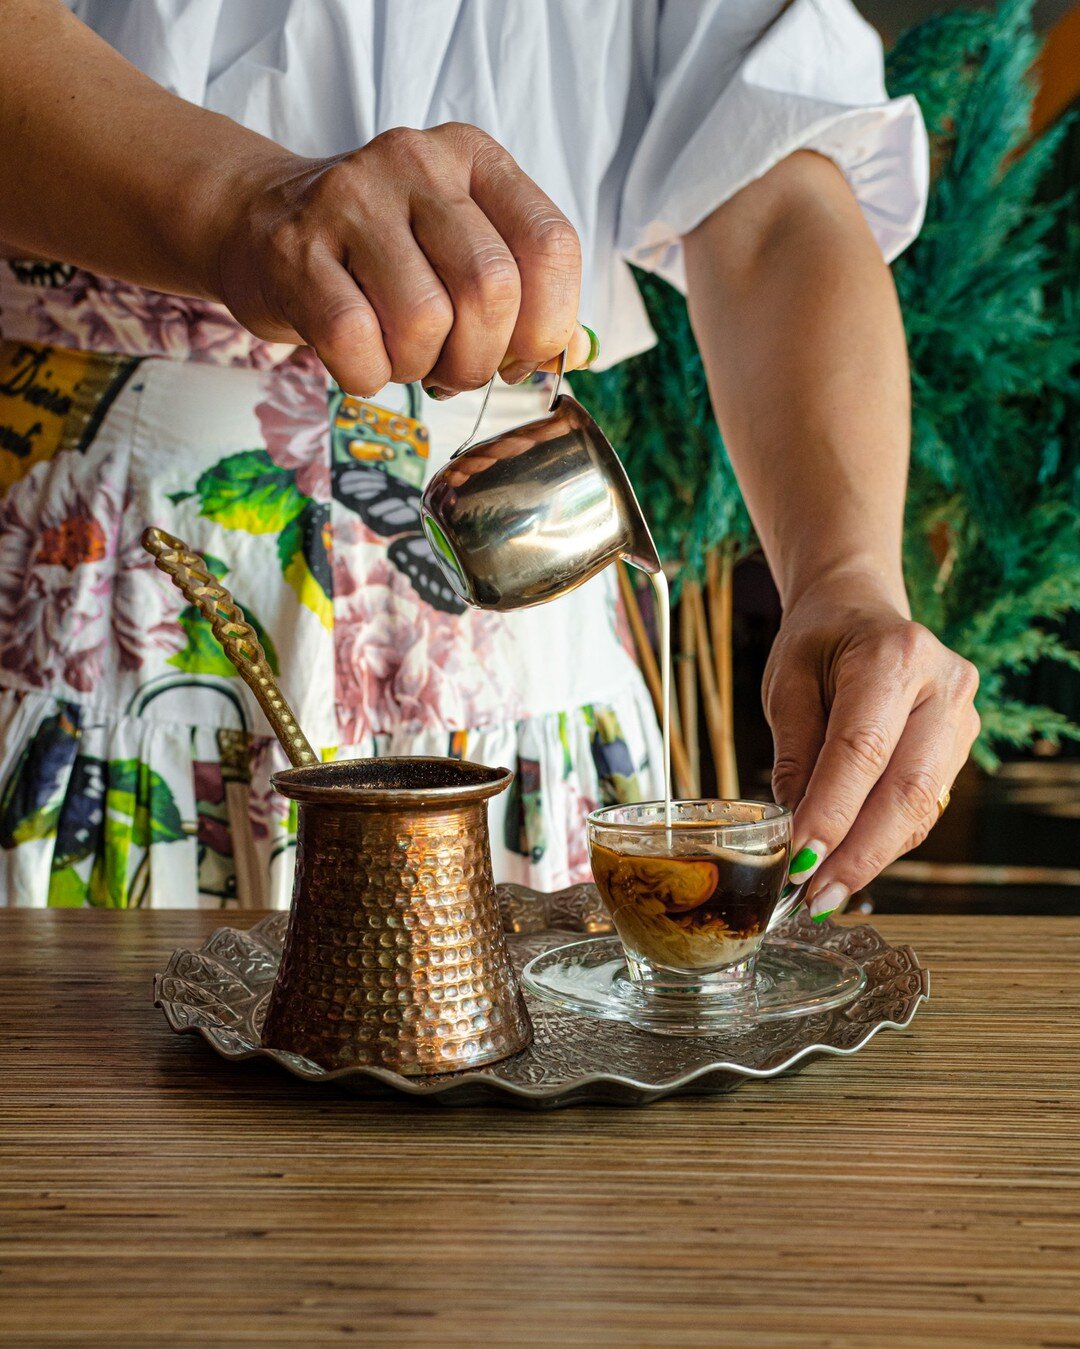 Have you had our Turkish Coffee Yet?! Well, if you are looking for a strong, smooth, and tasty dose of caffeine, then this is definitely your jam! 🤩🤩🤩
.
.
.
.
.
#pdxevents #pdxweddings #pdx #portland #gresham #nicholasrestaurant #pdxeats #downtown